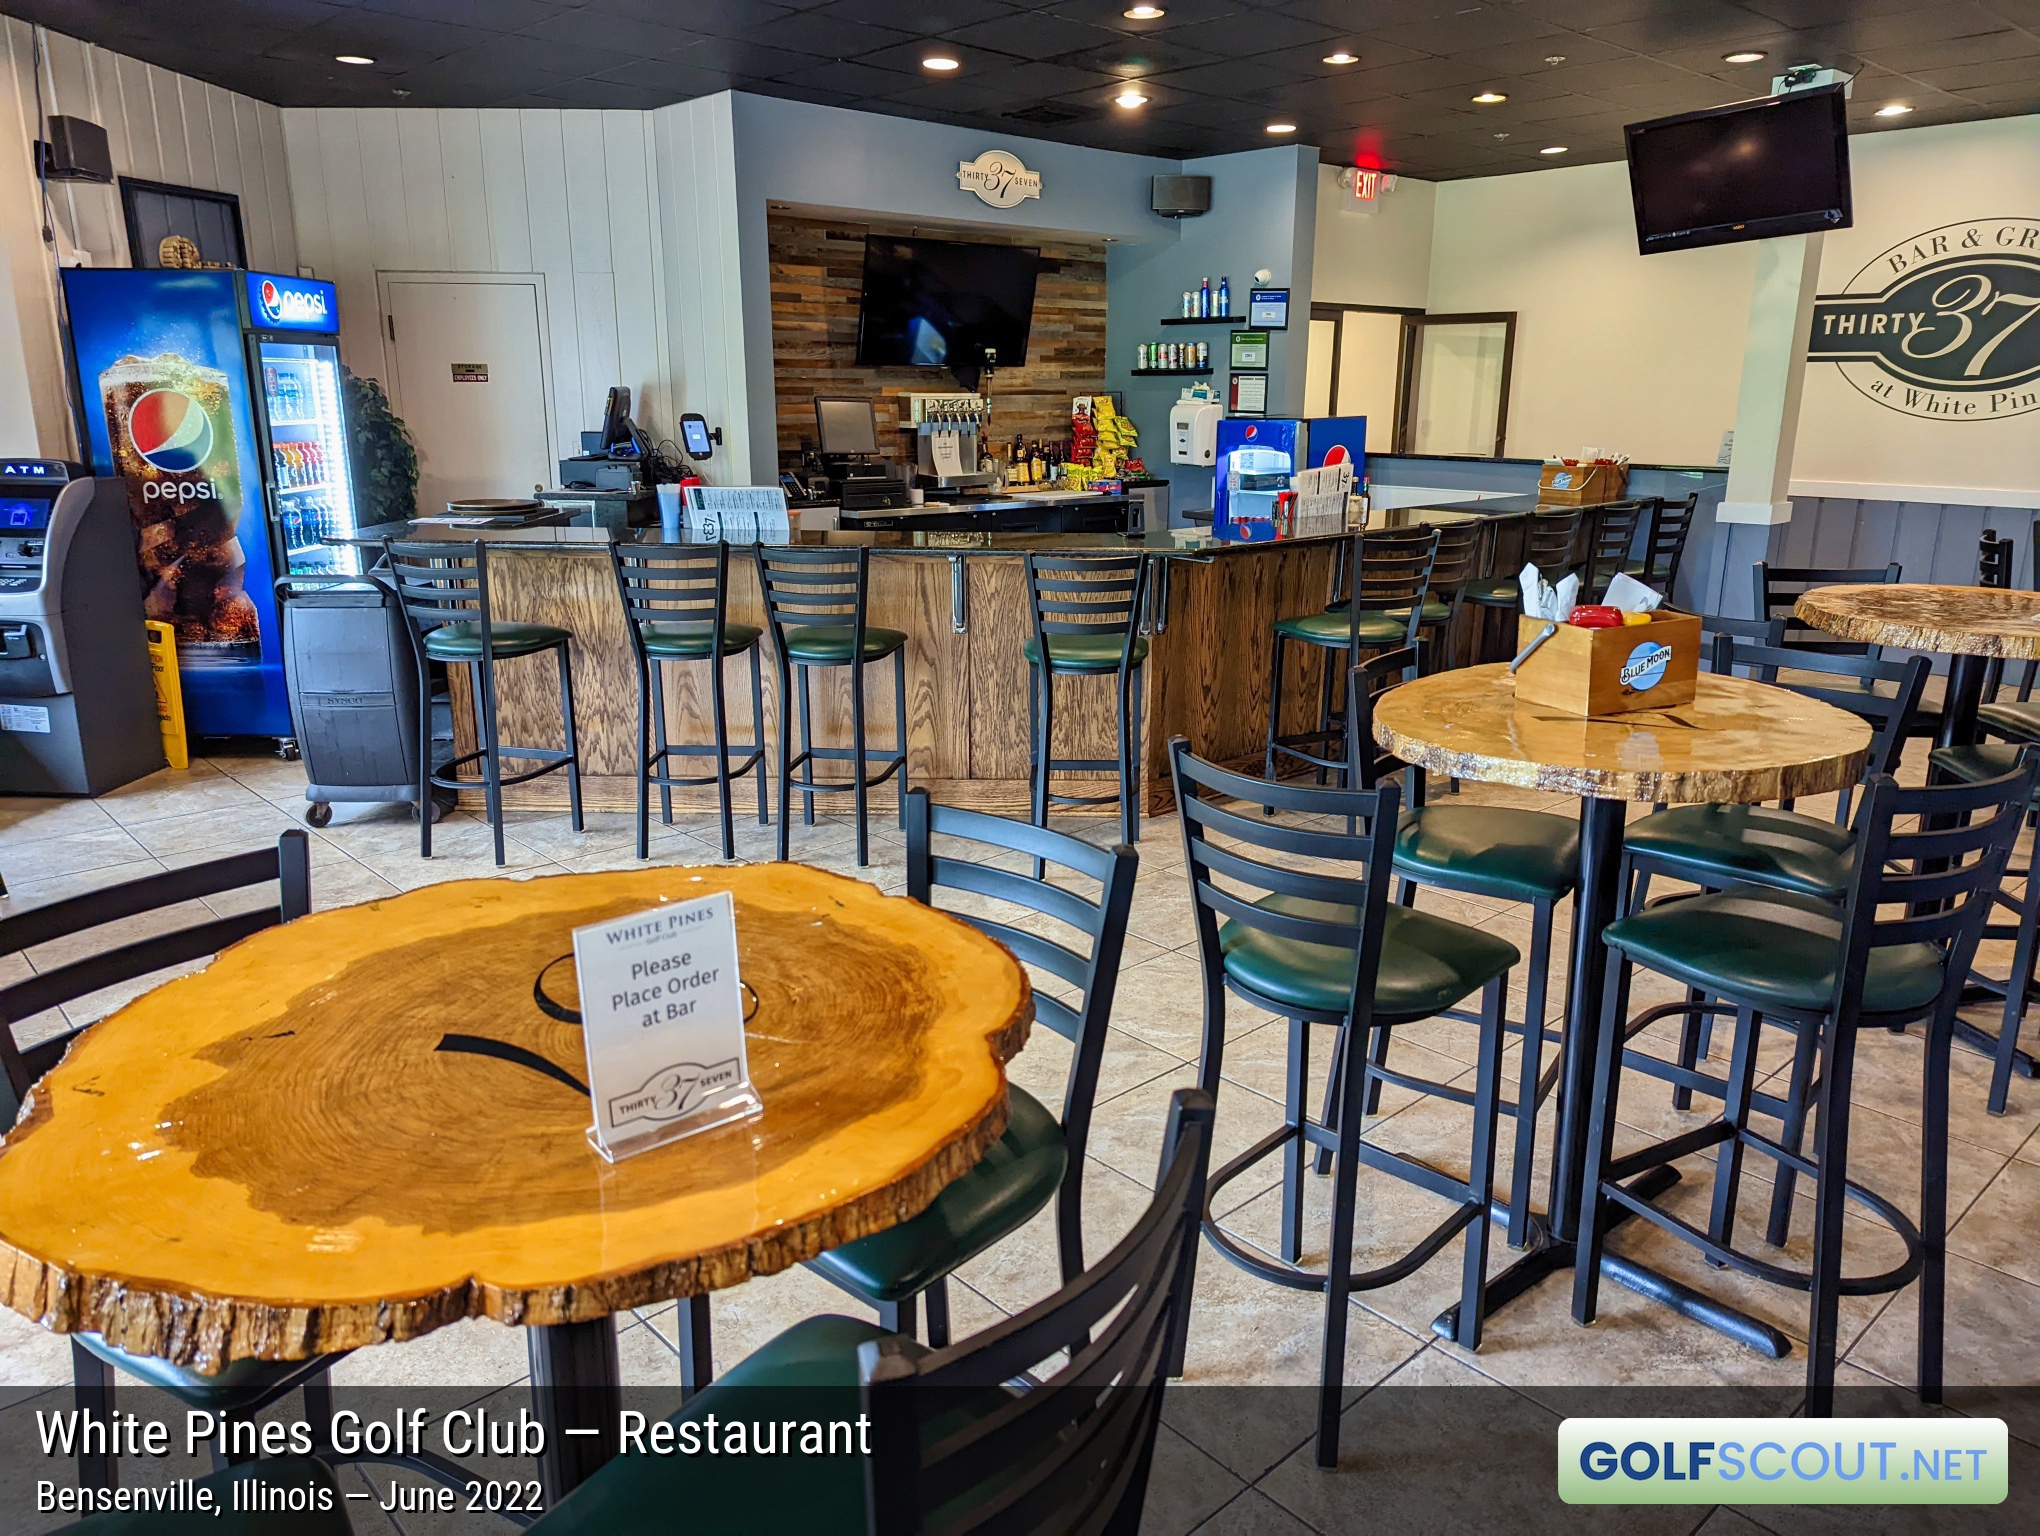 Photo of the restaurant at White Pines East Course in Bensenville, Illinois. 